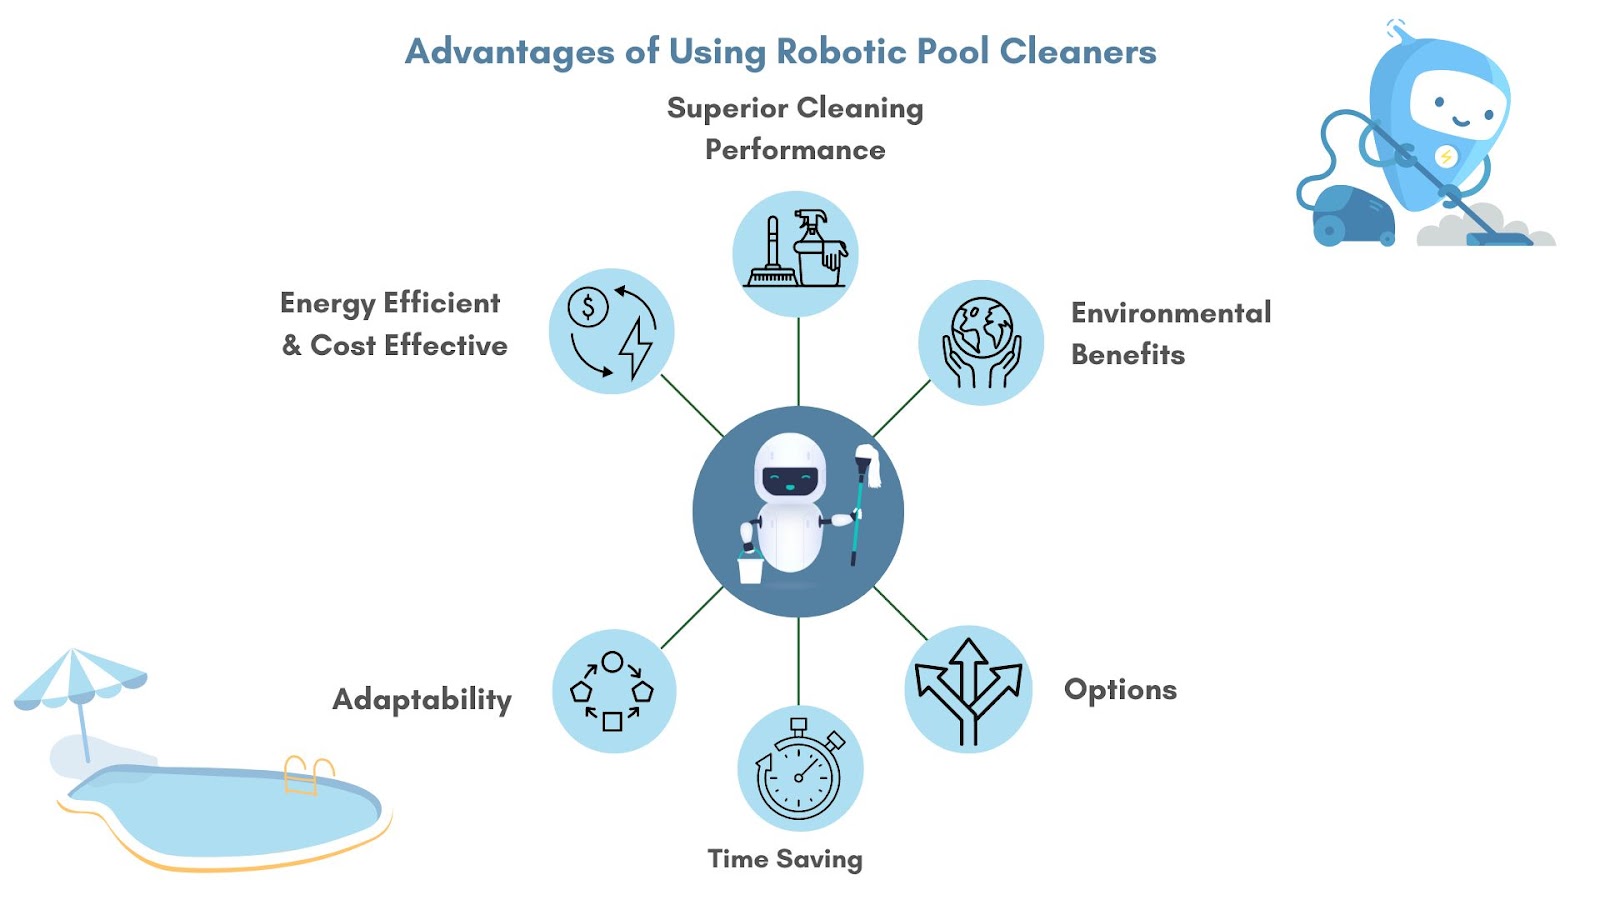 Advantages of Using Robotic Pool Cleaners